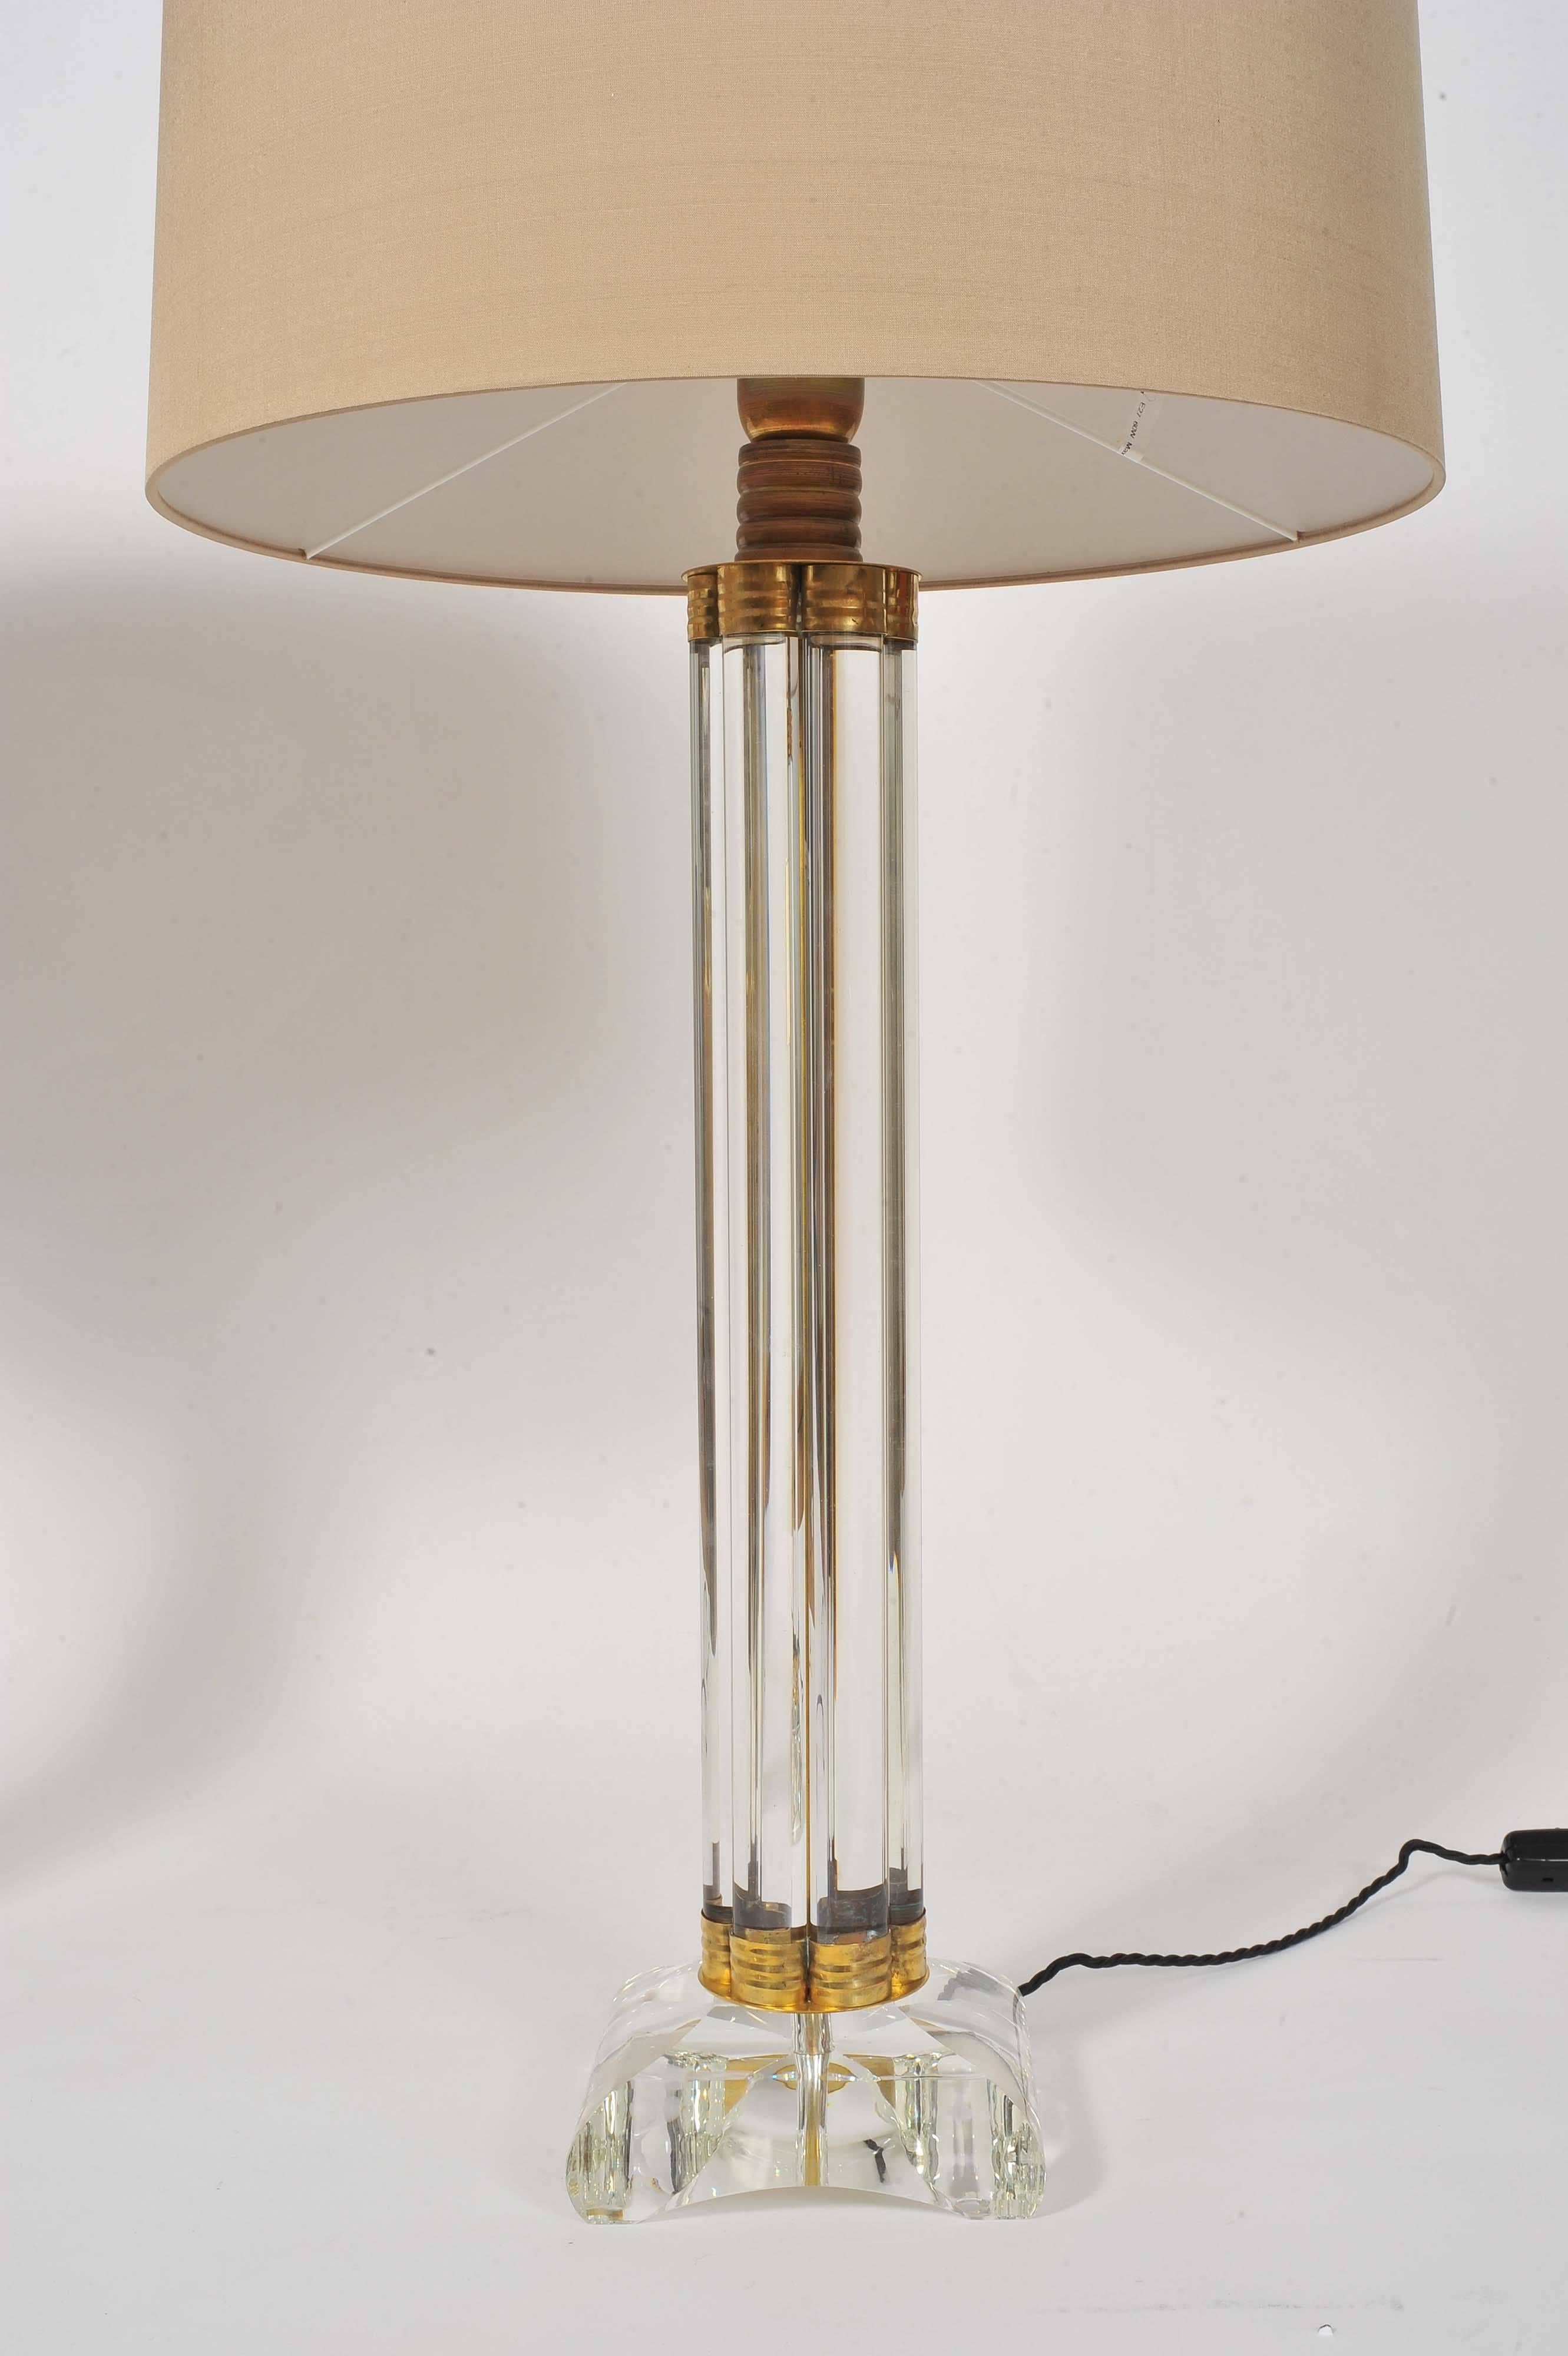 Striking pair of table lamps each made of six vertical glass rods held together at the top and bottom with decorative brass elements, standing on heavy square glass bases with rounded edges.
Height listed is without shades.